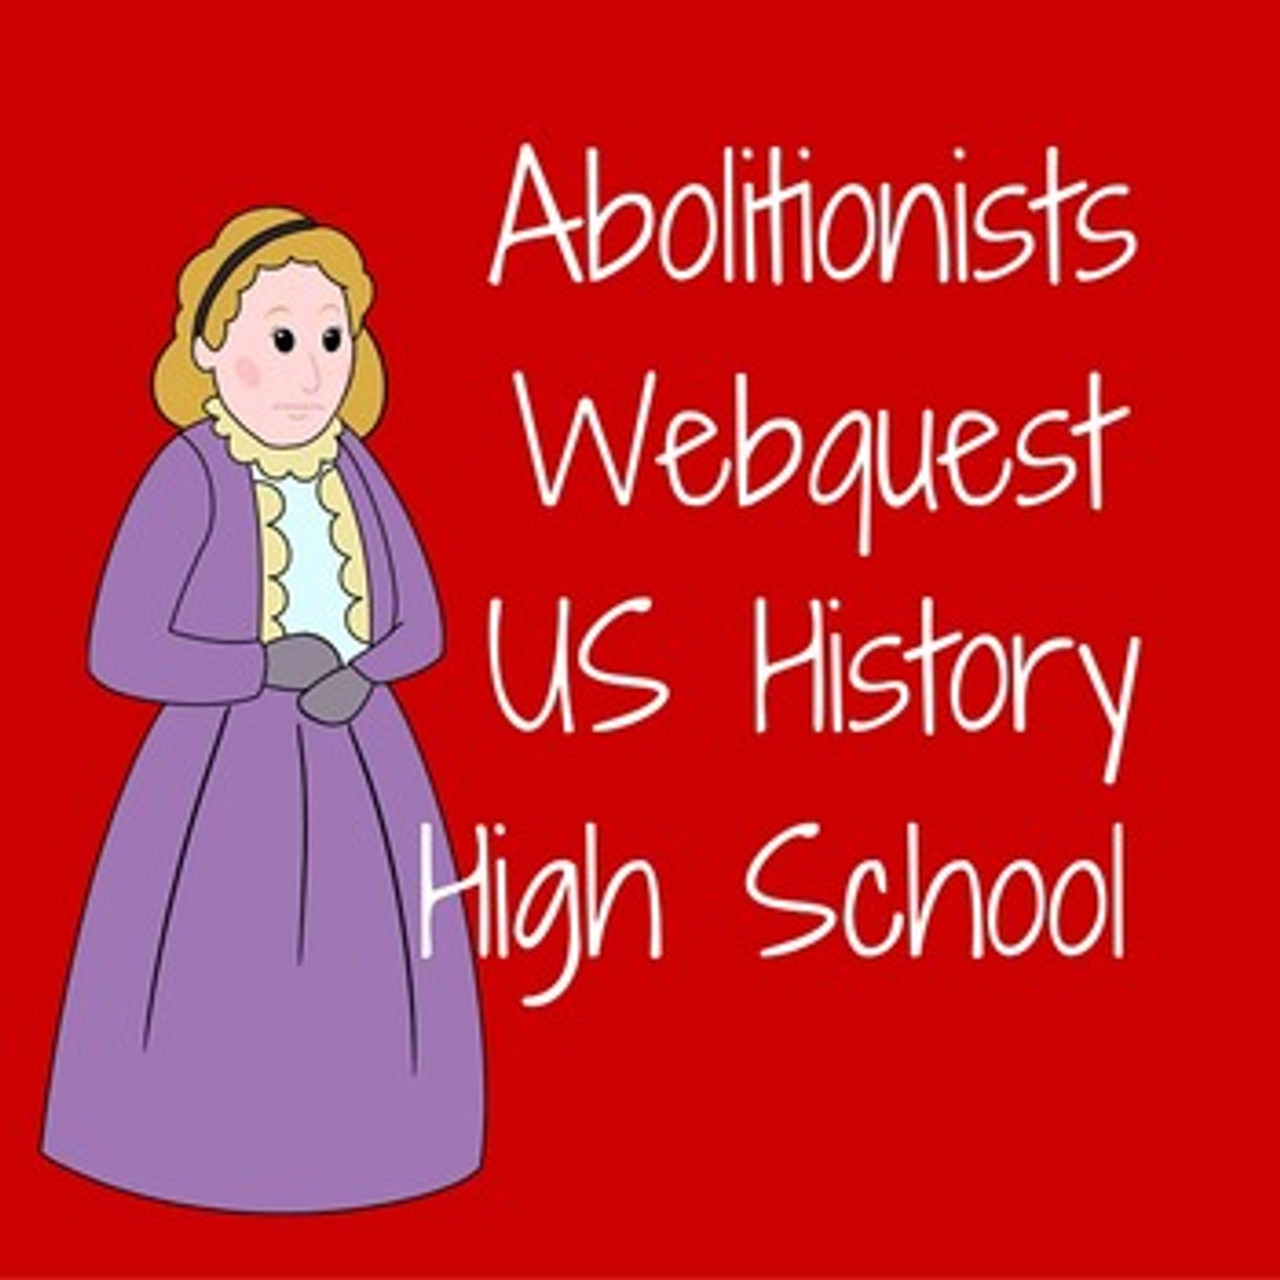 The Abolitionists Webquest